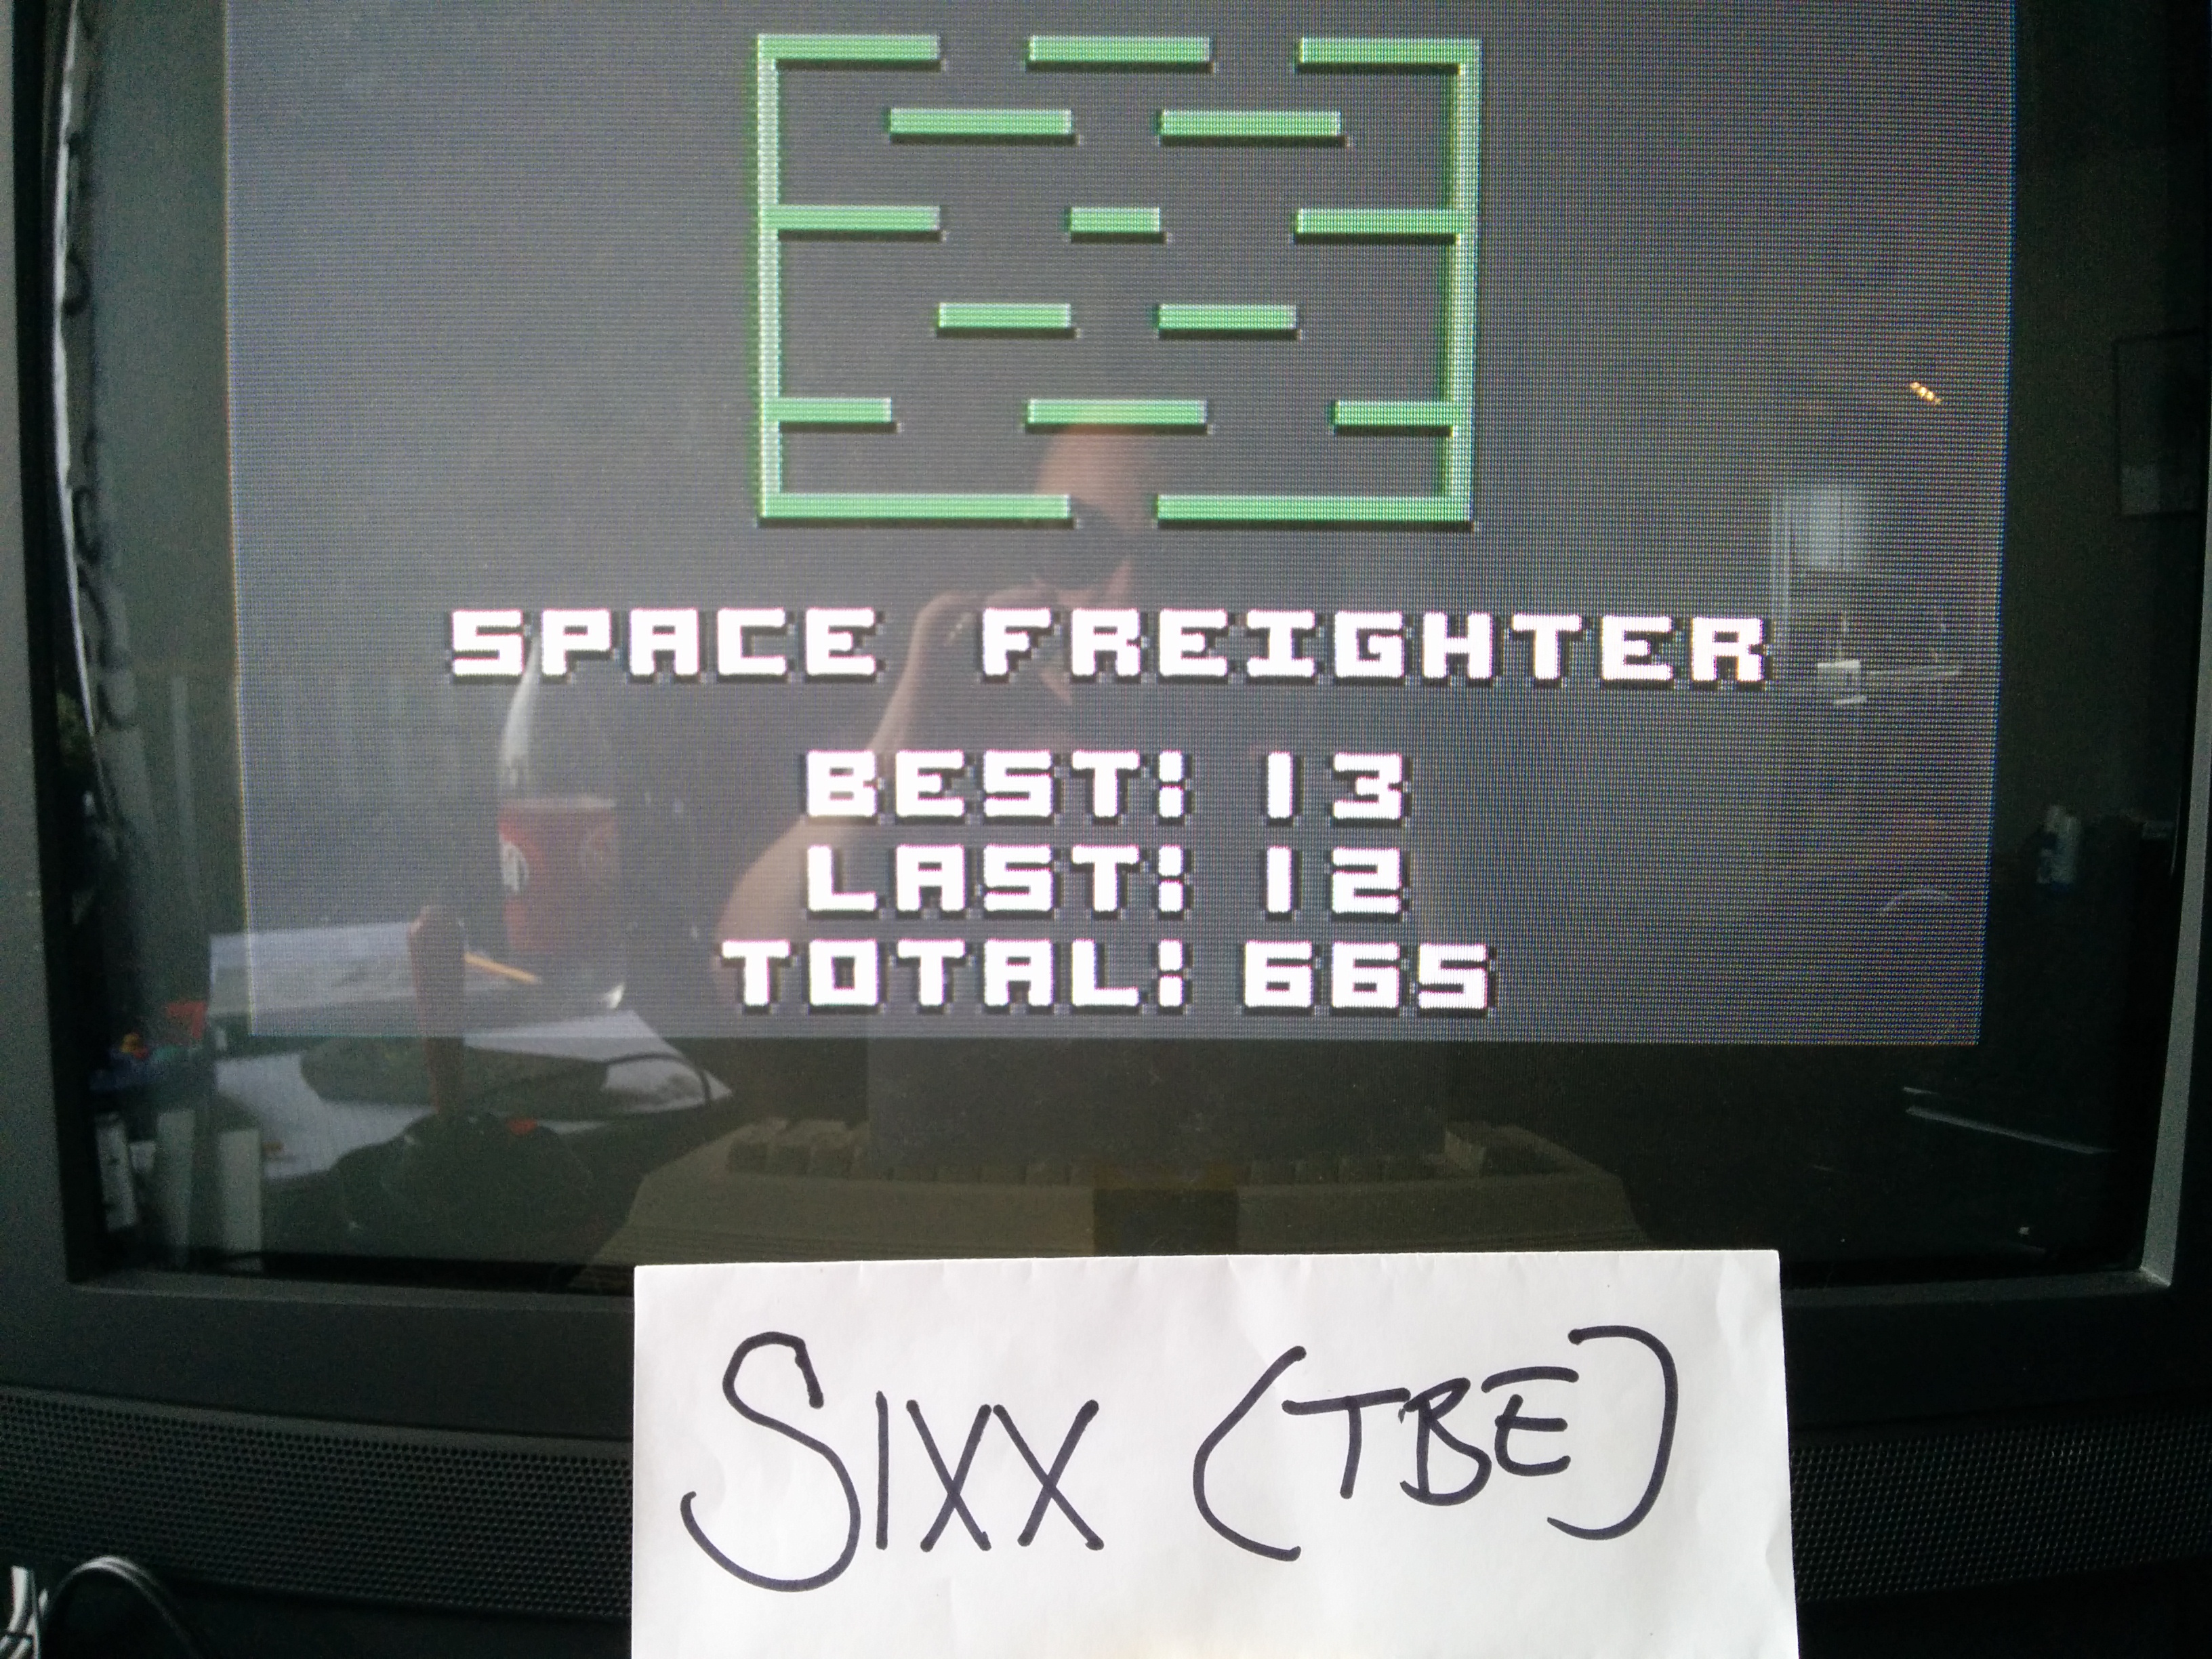 Sixx: Super Bread Box: Space Freighter (Commodore 64) 13 points on 2014-04-30 03:30:33